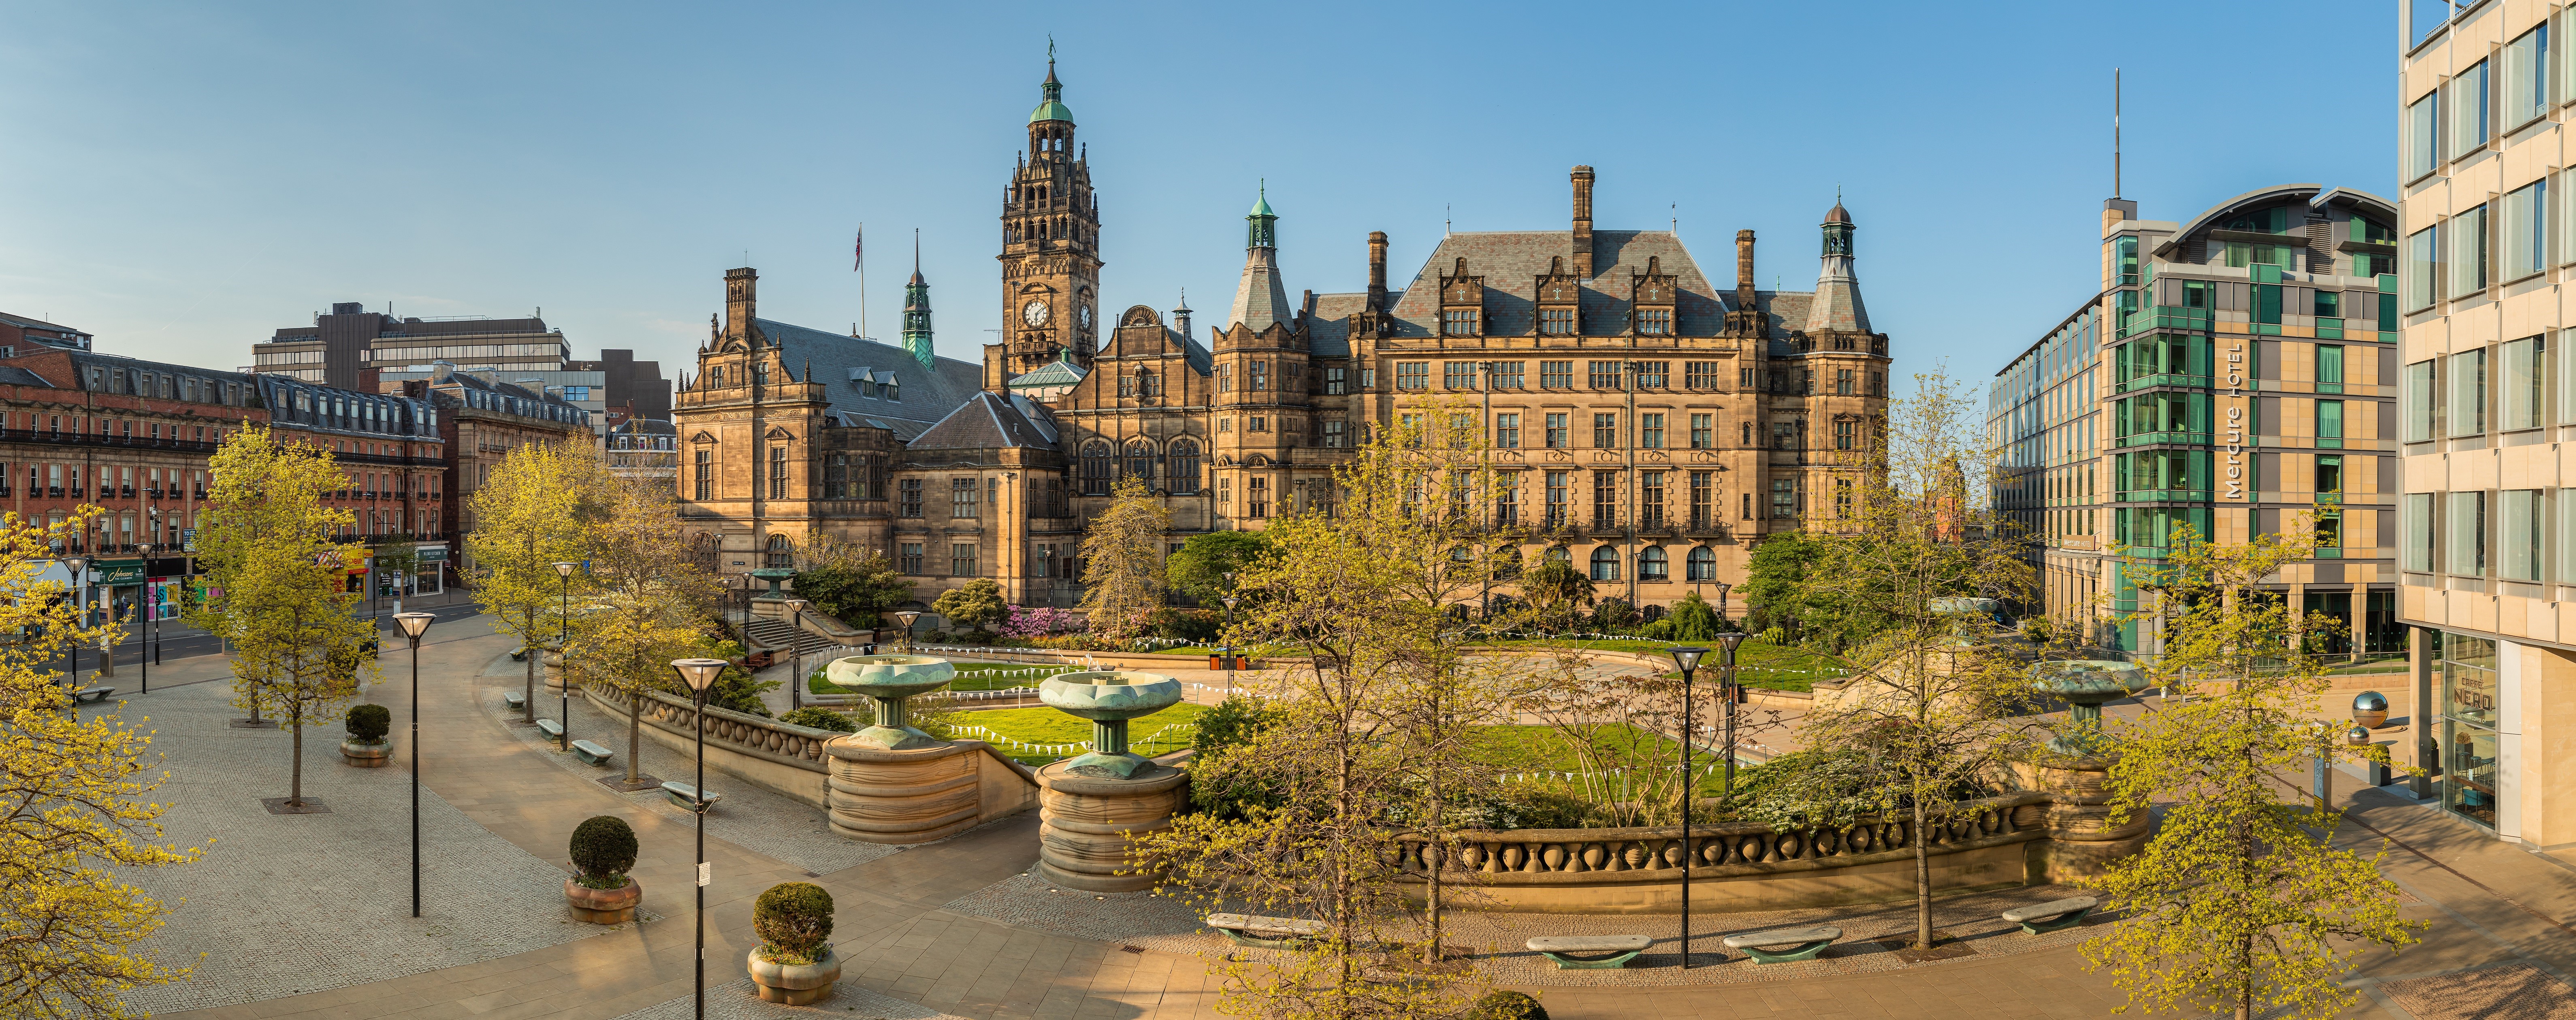 Town Hall and Peace Gardens at dusk